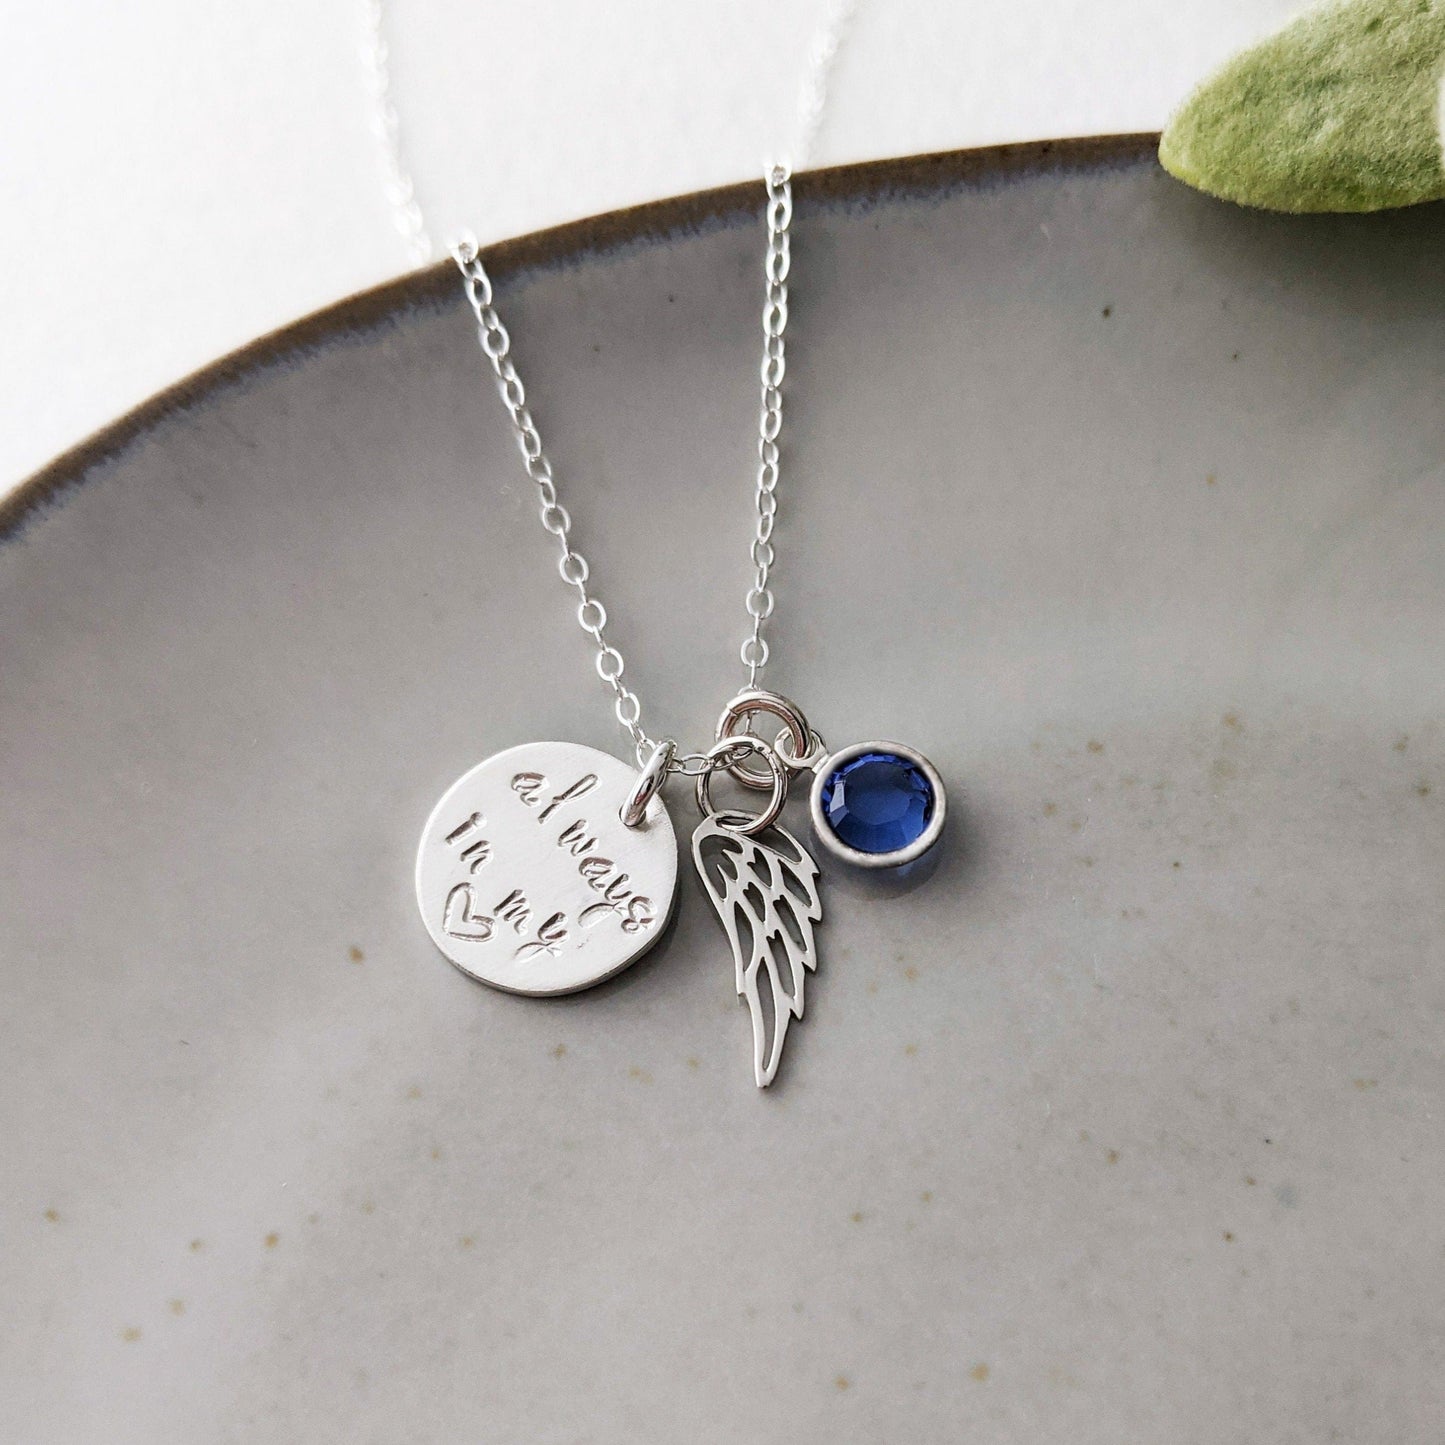 sterling silver necklace with always in my heart charm, wing charm and birthstone